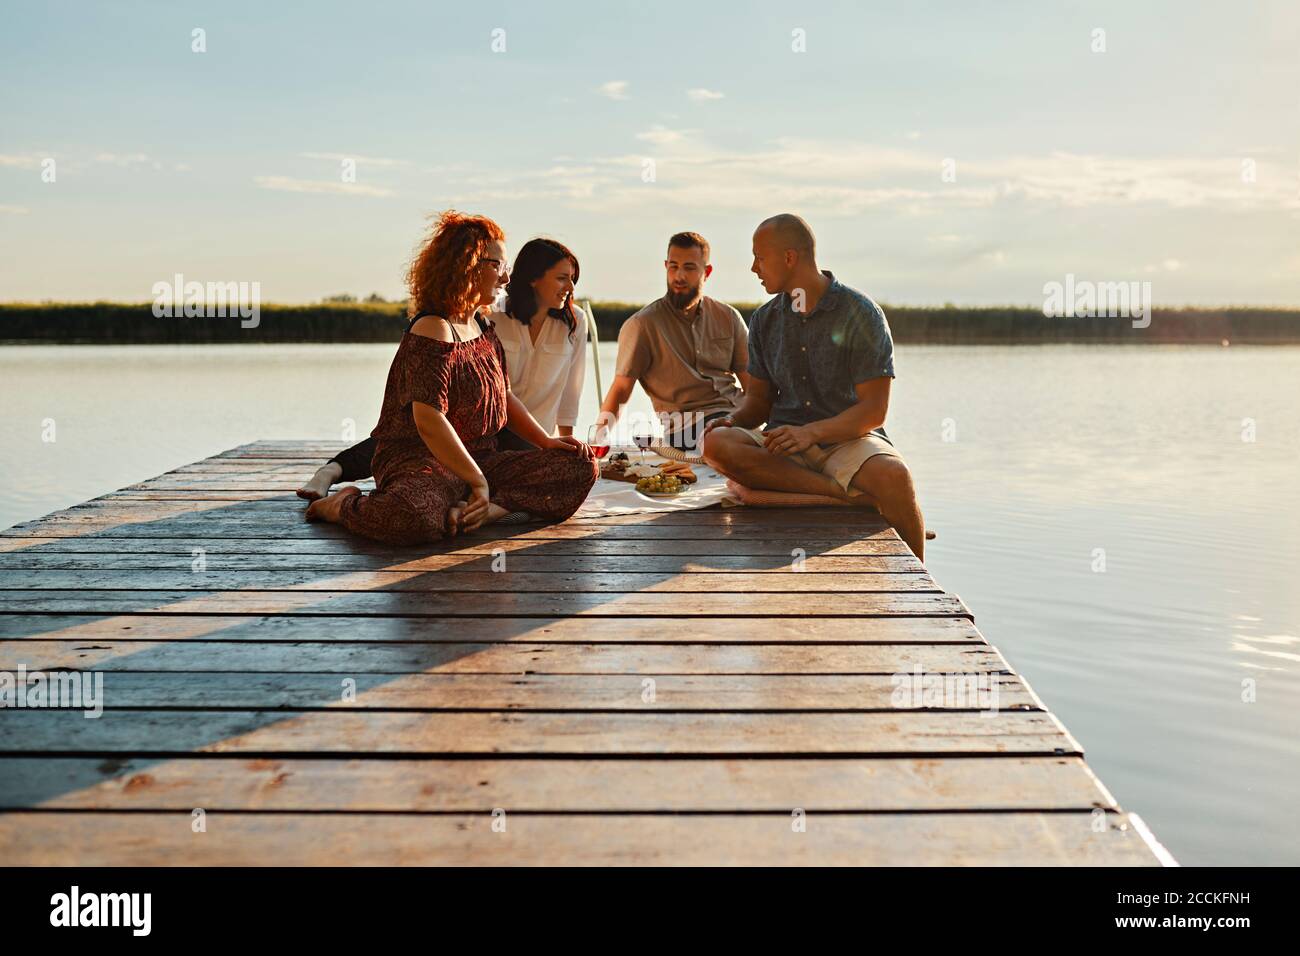 Friends having picnic on jetty at a lake at sunset Stock Photo